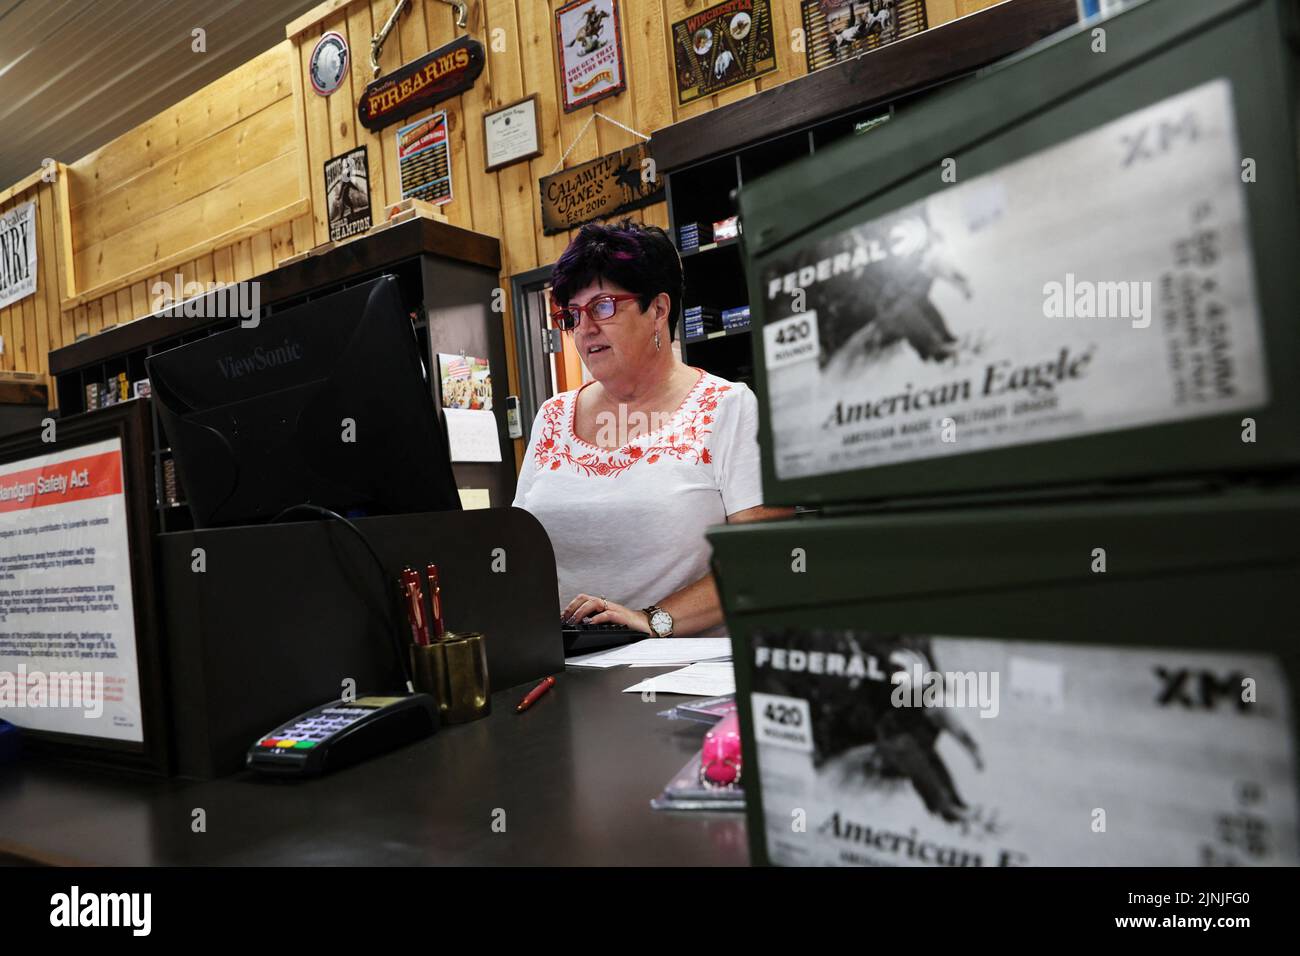 Jane Haven, manager of Calamity Jane's Firearms and Fine Shoes, works behind the counter at Calamity Jane's, in Hudson Falls, New York, U.S., July 20, 2022. REUTERS/Shannon Stapleton Stock Photo